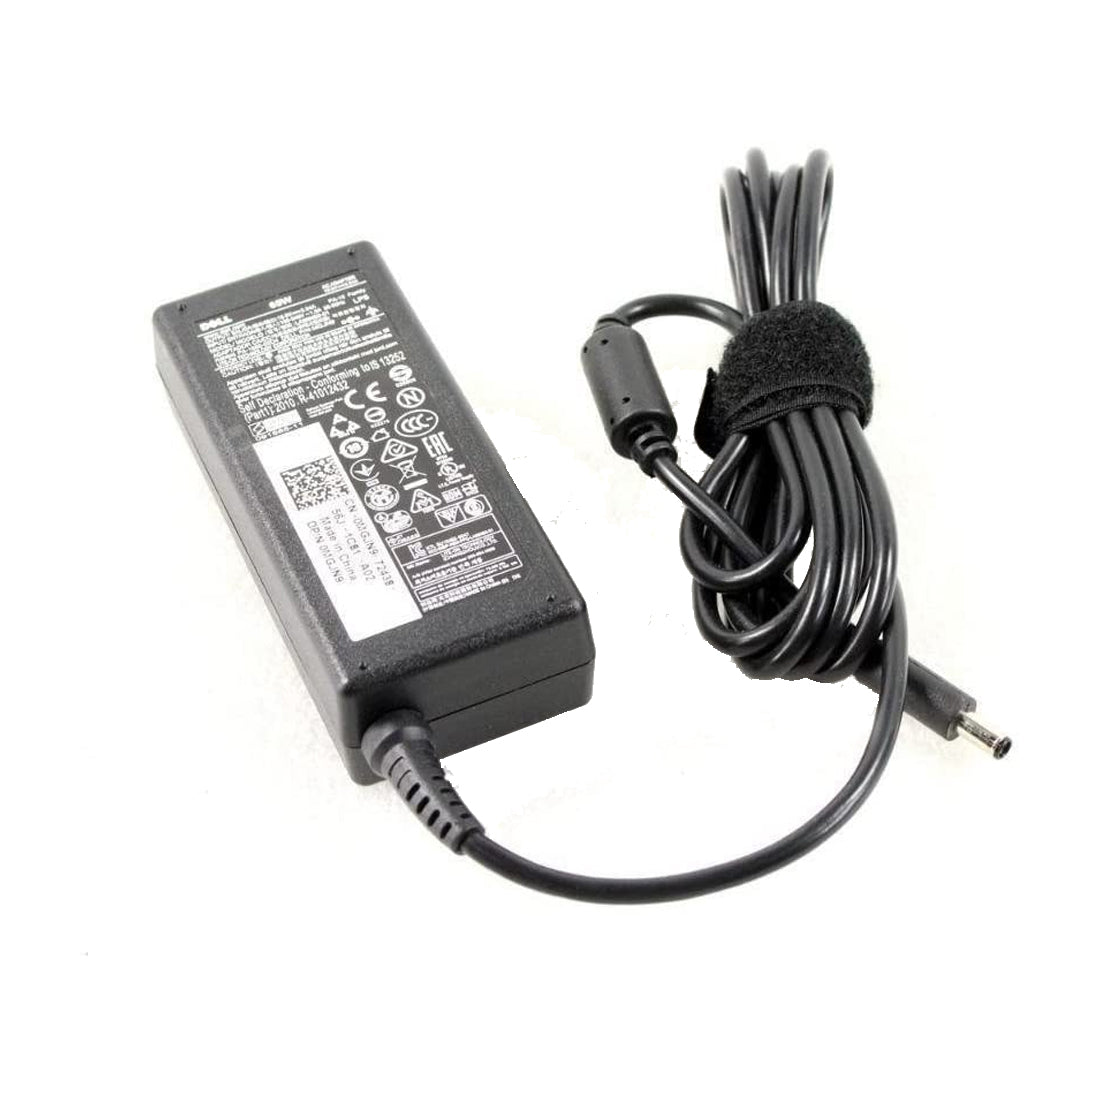 Dell Original 65W 19.5V 4.5mm Pin Laptop Charger Adapter for XPS 13 9350 With Power Cord